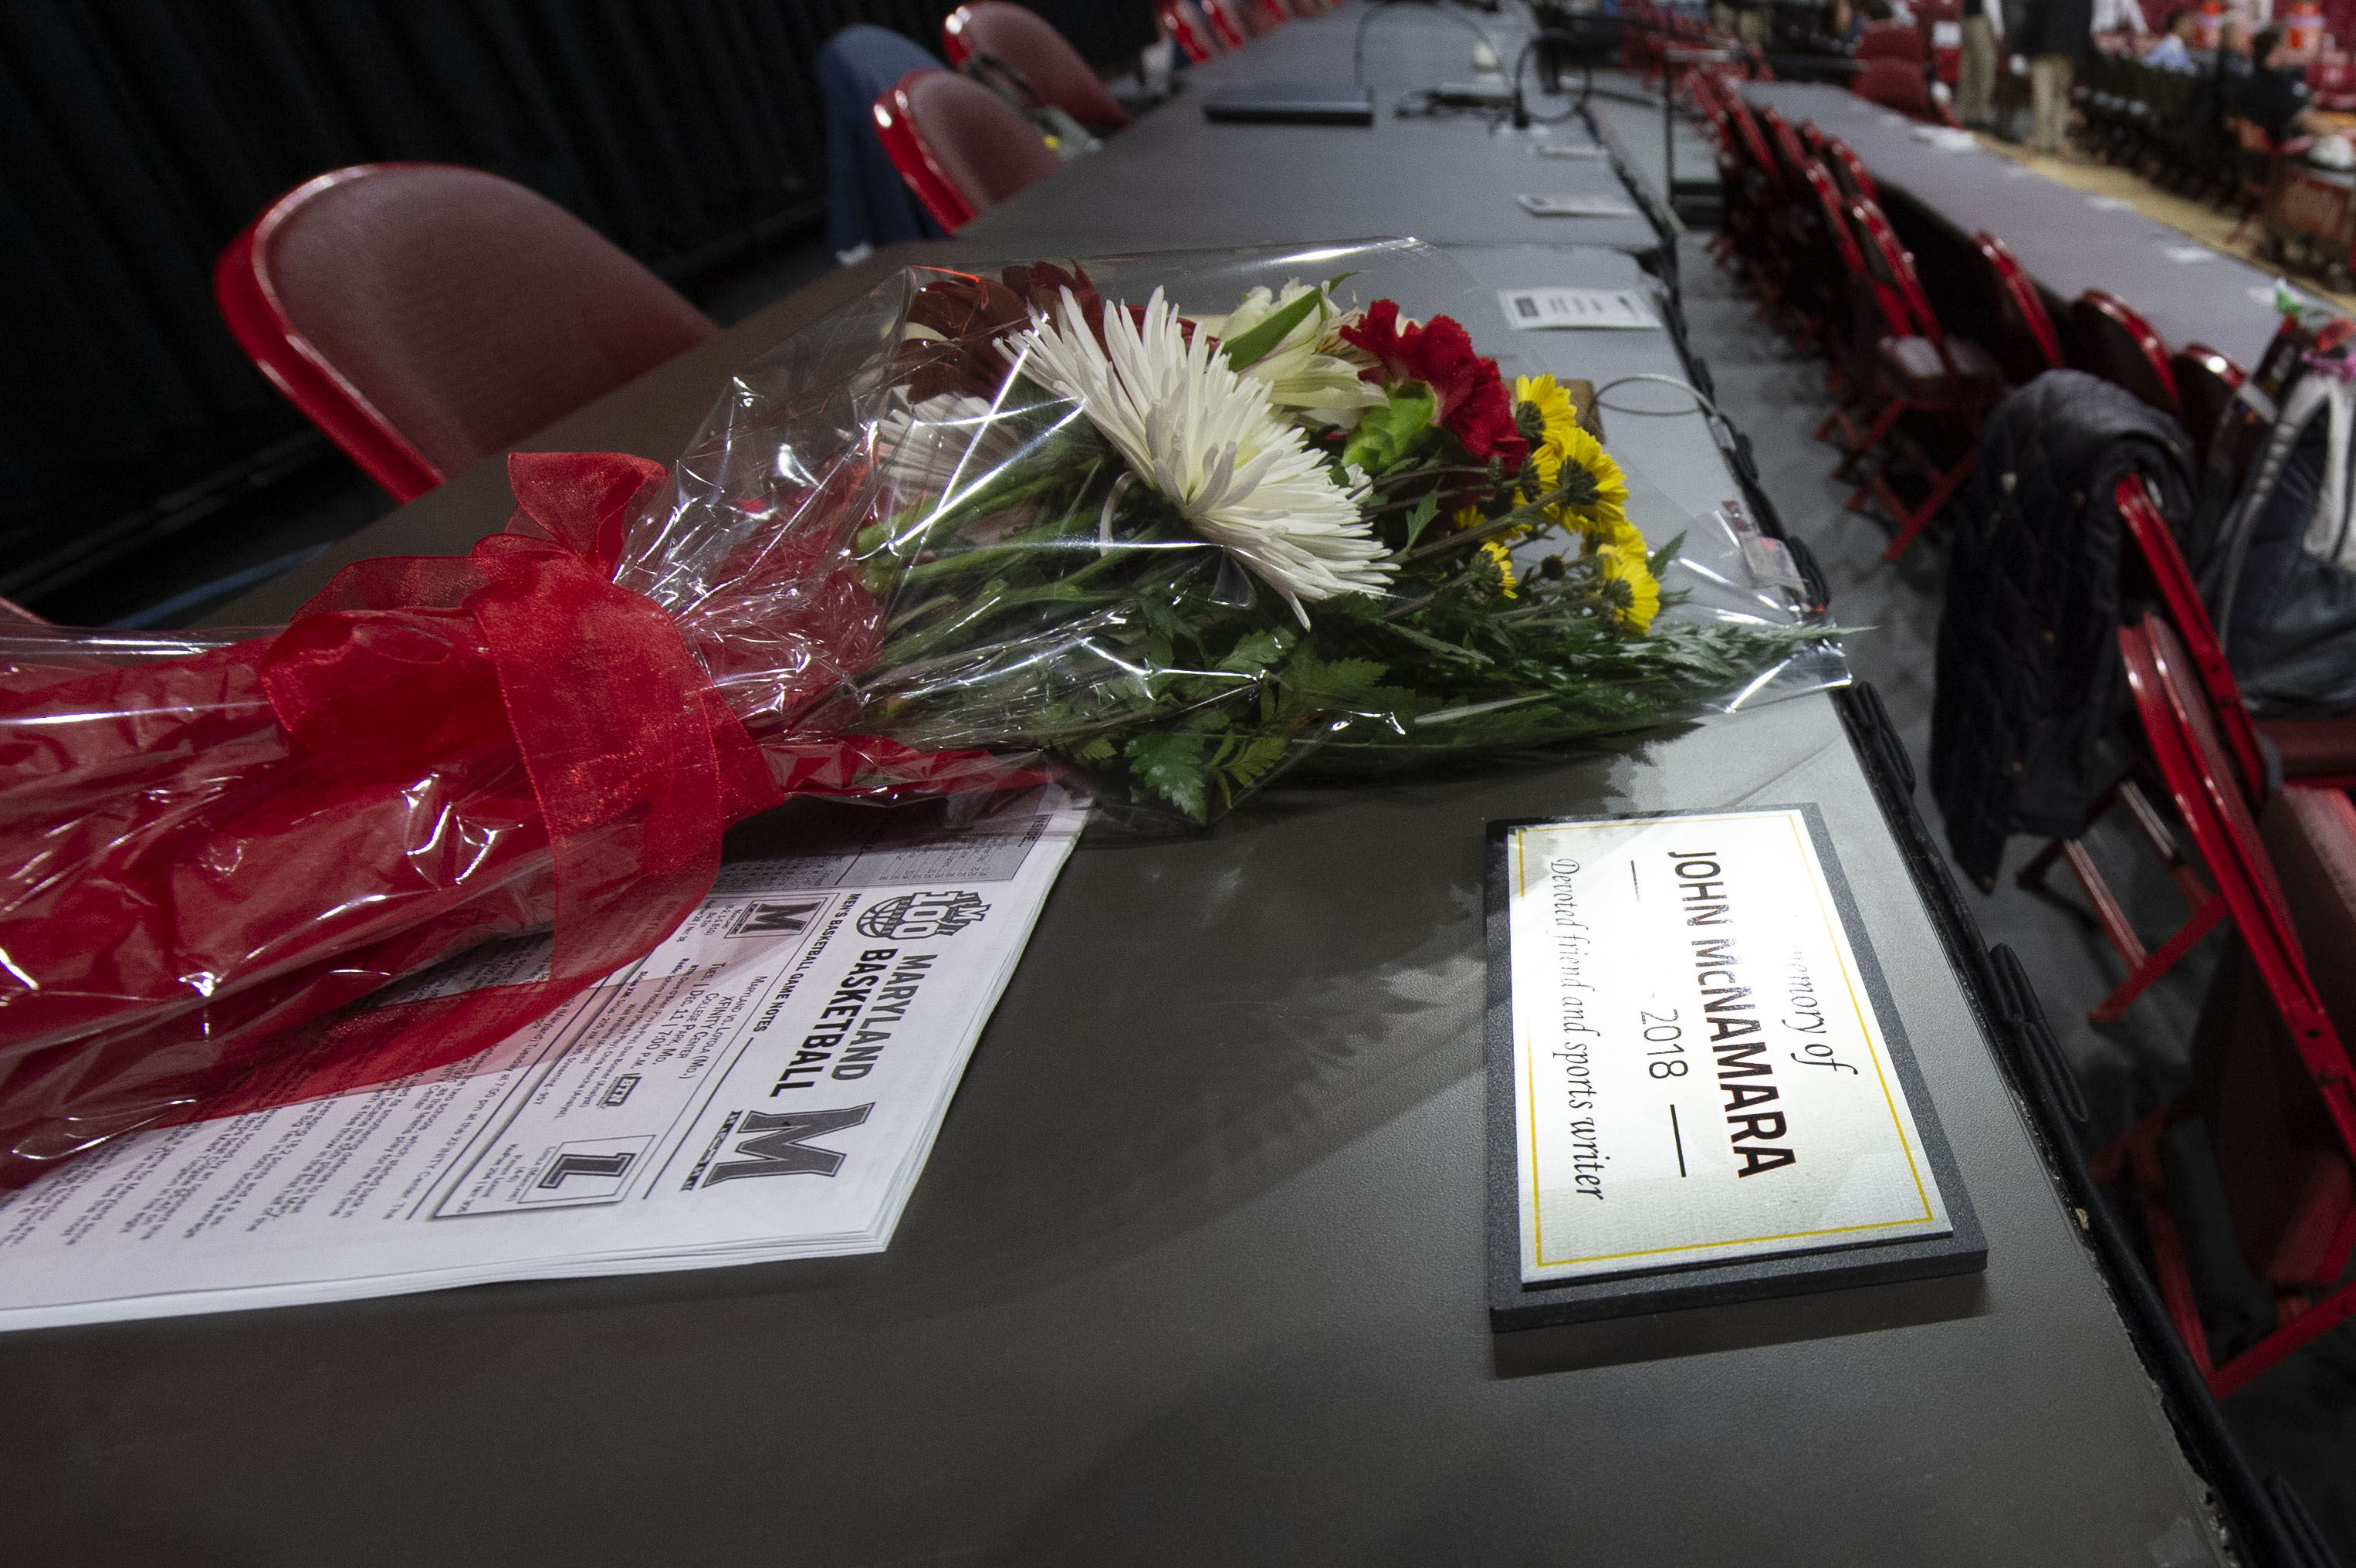 Dec 11, 2018; College Park, MD, USA; A memorial for Capital Gazette journalist John McNamara, who was killed in a mass shooting in a news room earlier this year, sits on press room before the game between the Maryland Terrapins and the Loyola (Md) Greyhounds at XFINITY Center. Mandatory Credit: Tommy Gilligan-USA TODAY Sports - 11829142